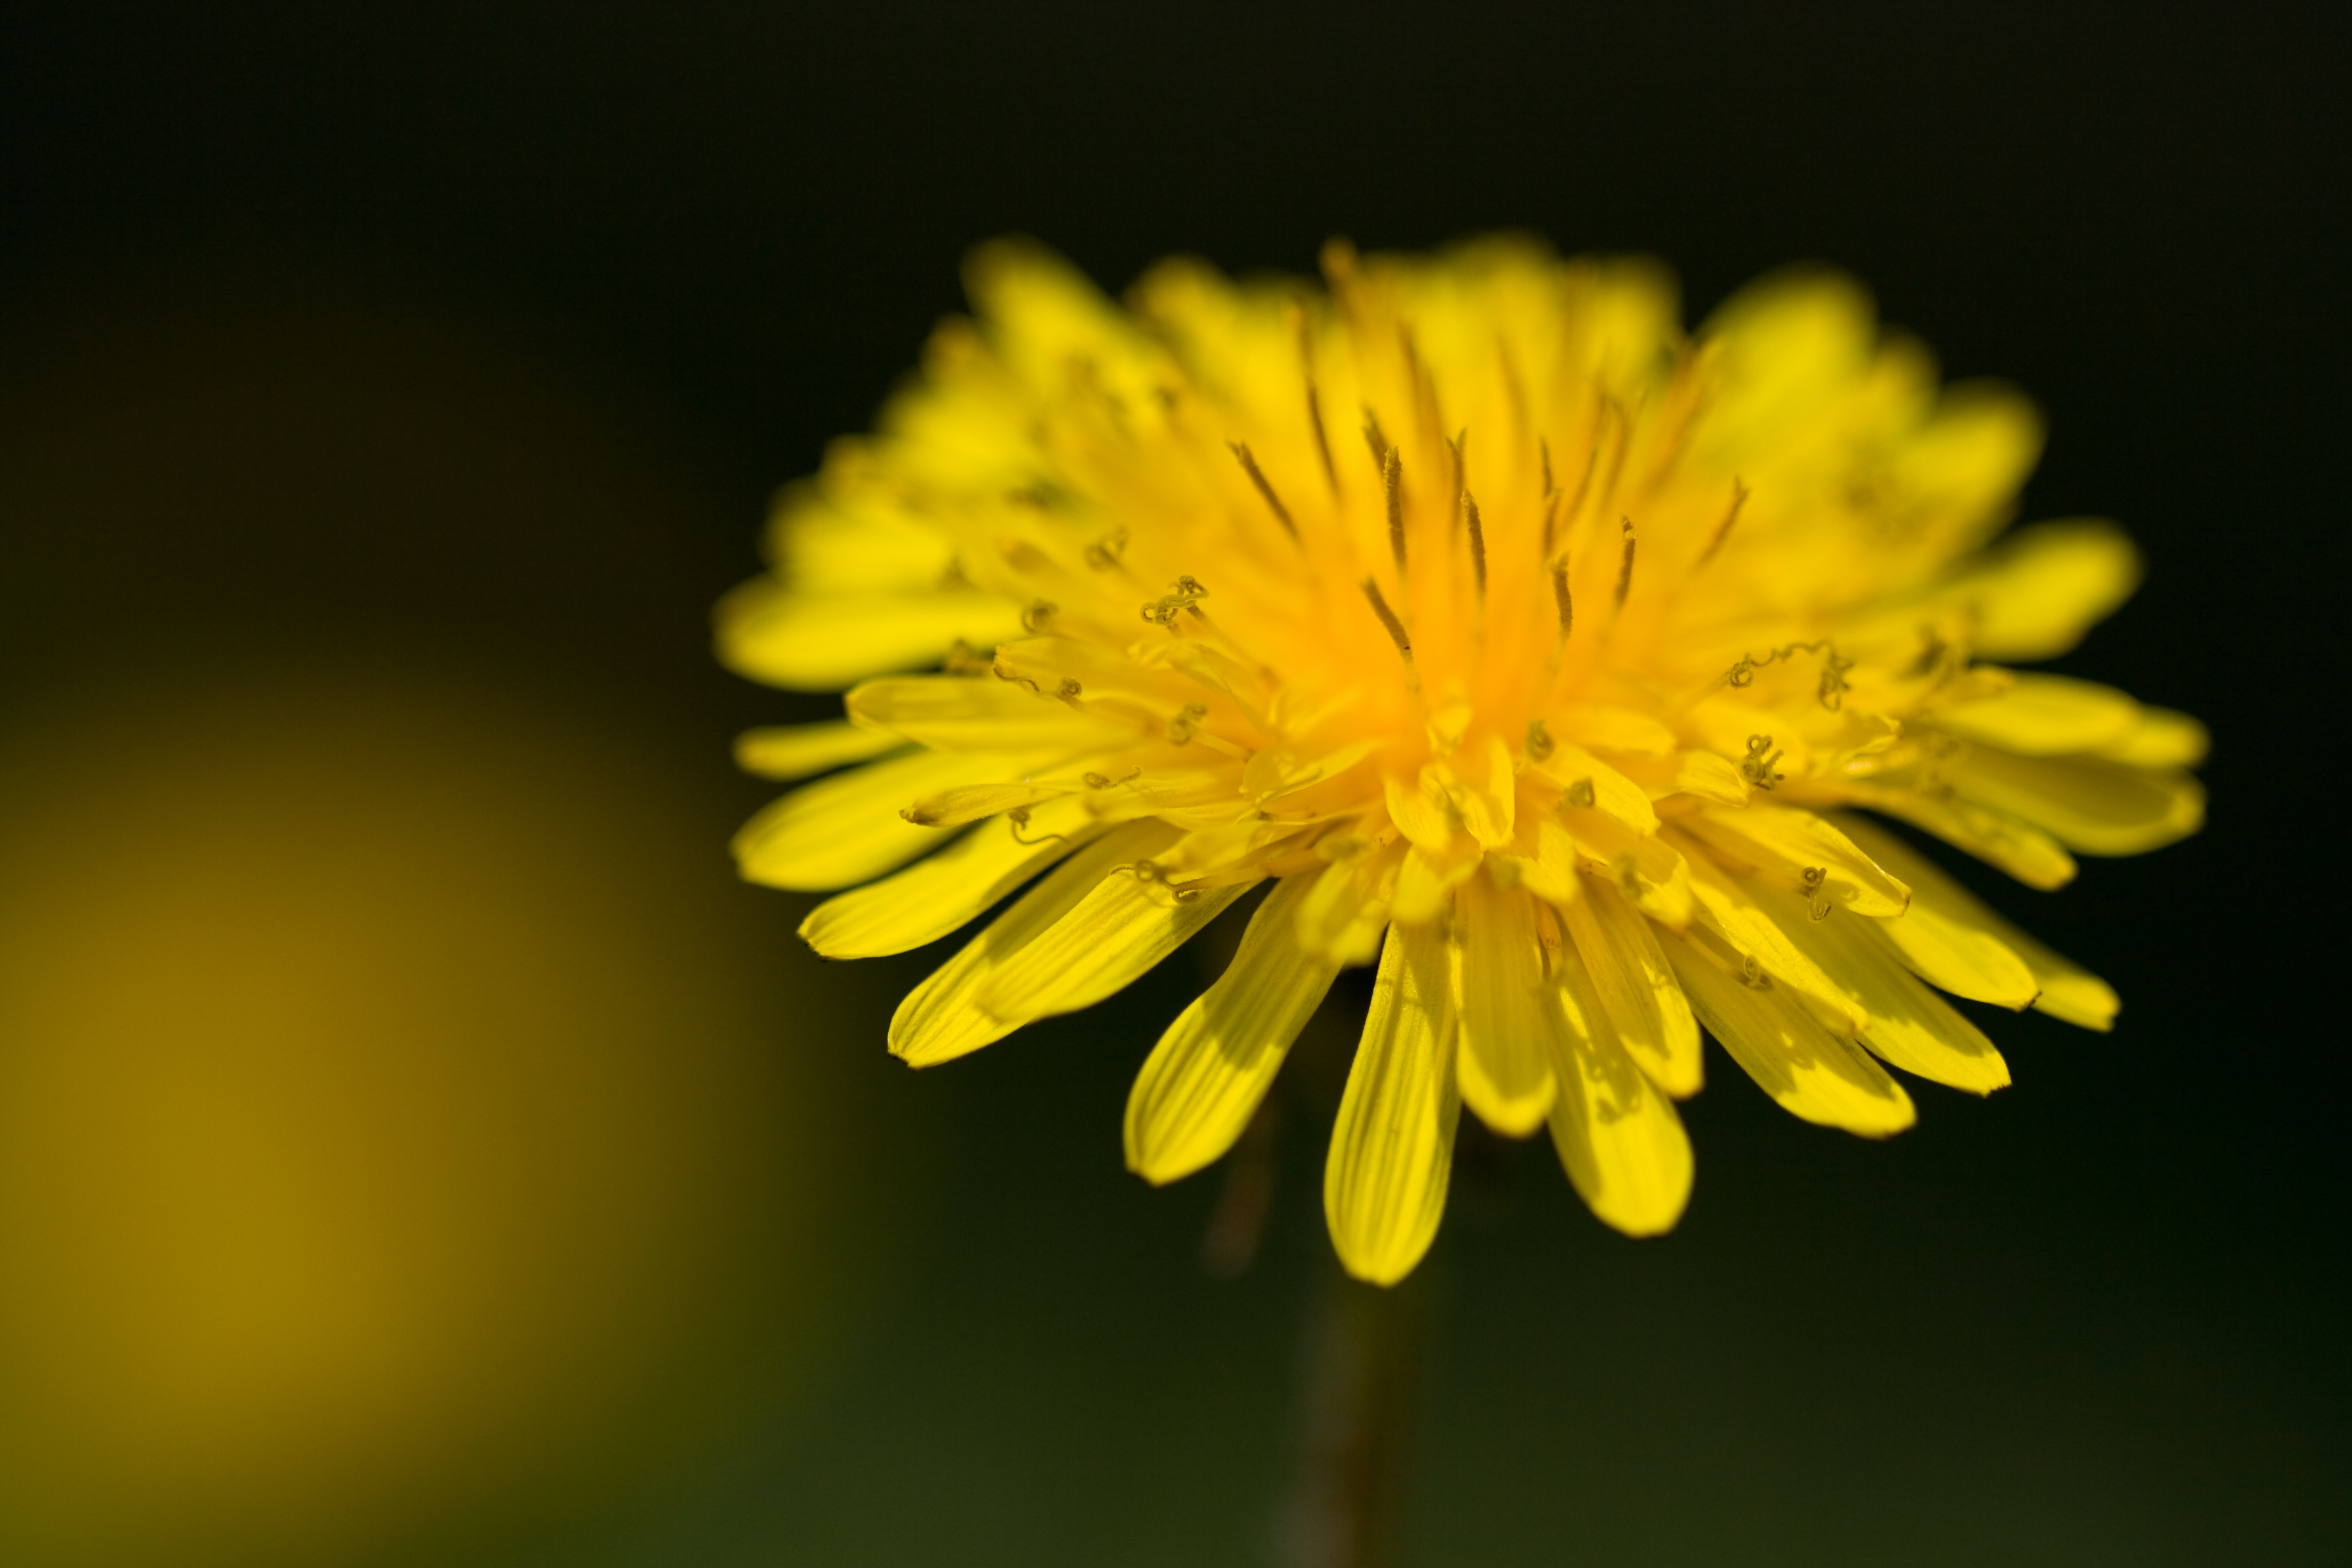 Dandelion Helps Heal 14 Medical Conditions - Heal Naturally